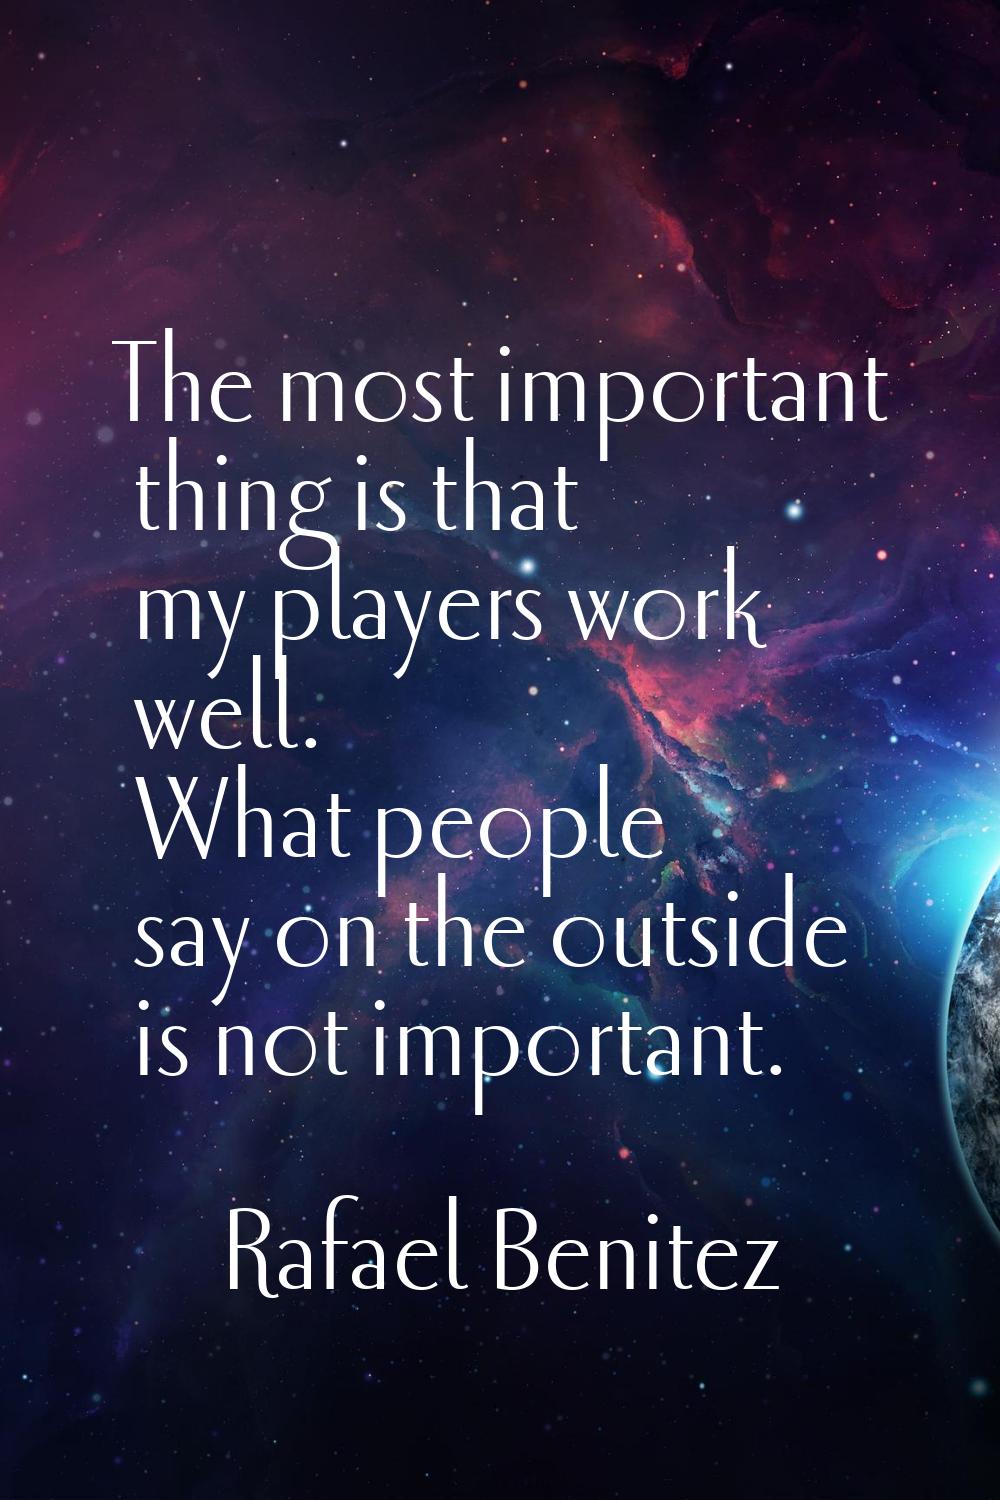 The most important thing is that my players work well. What people say on the outside is not import